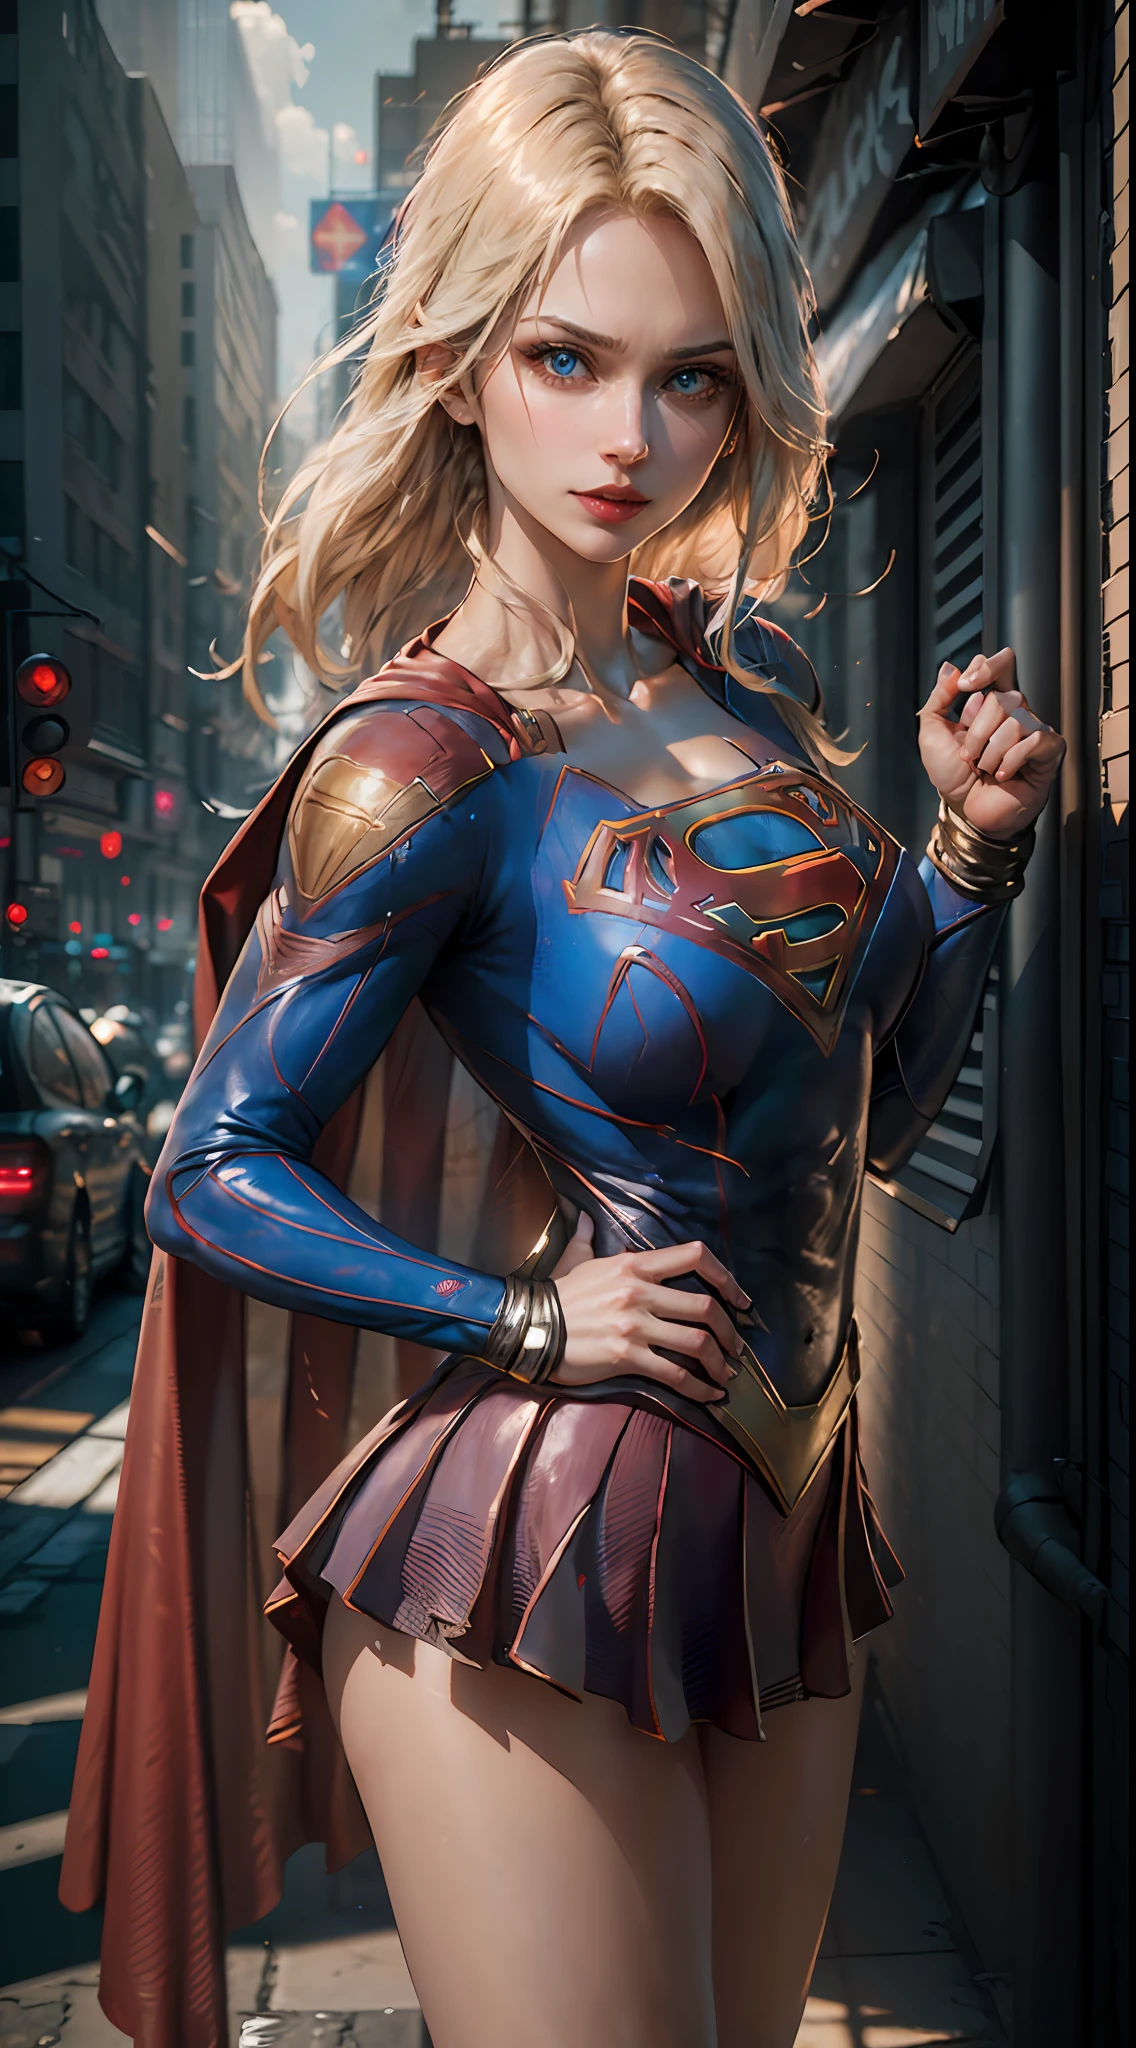 ((Best Supergirl Quality)), ((masterpiece)), (detailed: 1.4), 3D, an image of a beautiful blonde woman with cyberpunk blue eyes,HDR (High Dynamic Range),Ray Tracing,NVIDIA RTX,Super-Resolution,Unreal 5,Subsurface Dispersion, PBR Texture, Post-processing, Anisotropic filtering, Depth of field, Maximum clarity and sharpness, Multilayer textures, Albedo and specular maps, Surface shading, Accurate simulation of light-material interaction,  Perfect Proportions, Octane Render, Two-Tone Lighting,Wide Aperture,Low ISO,White Balance,Rule of Thirds,8K RAW, Using Superman S symbol on Chest. Cyberpunk.